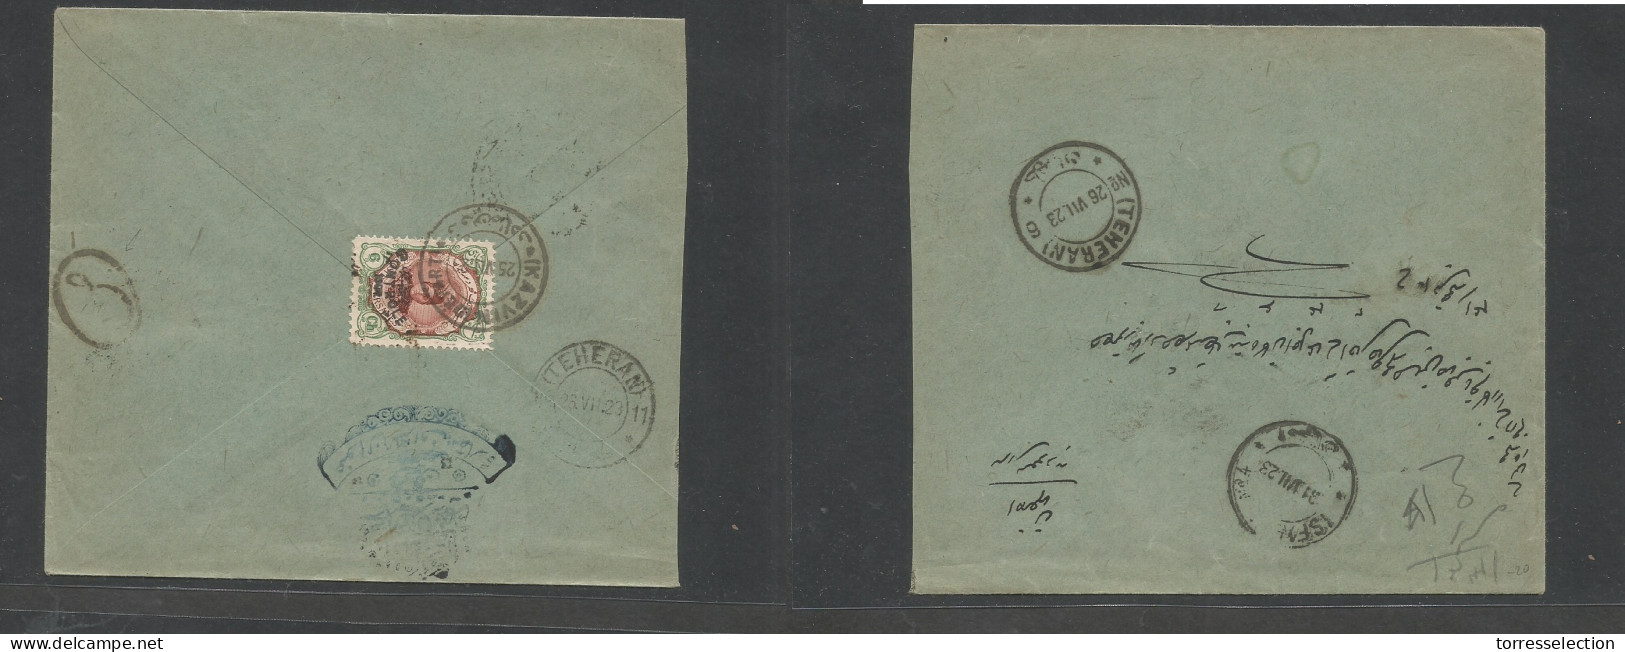 PERSIA. 1923 (25 July) Kazvin - Ispahan (31 July) Via Teheran "Controle" Issue Ovptd 6ch Stamps On Reverse Of Envelope,  - Iran